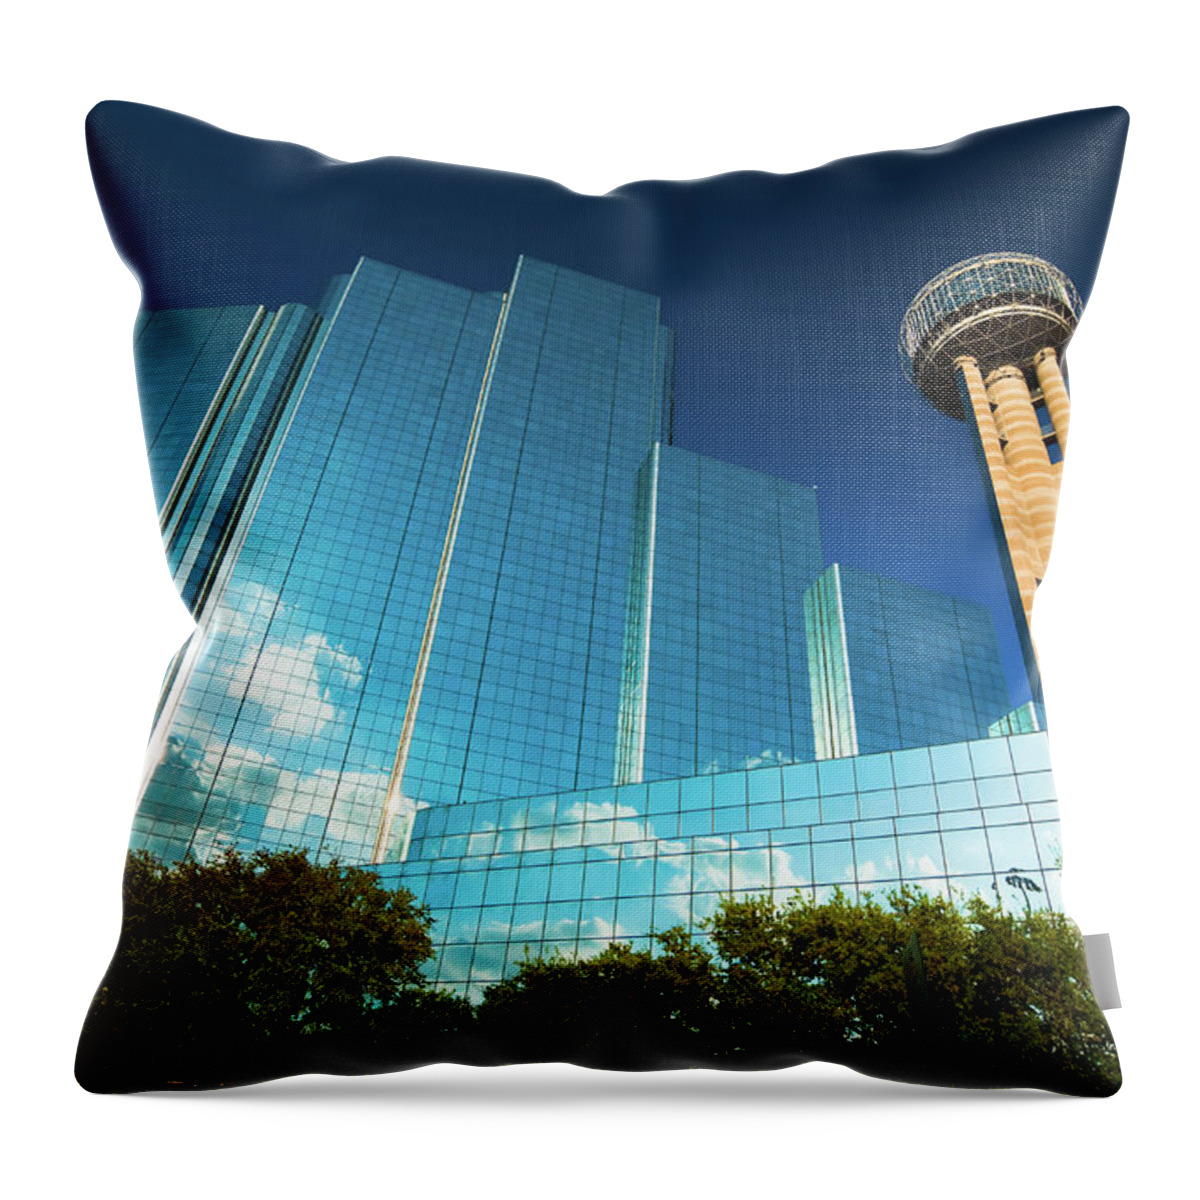 Hotel Throw Pillow featuring the photograph Reunion Tower And Hotel by Davel5957